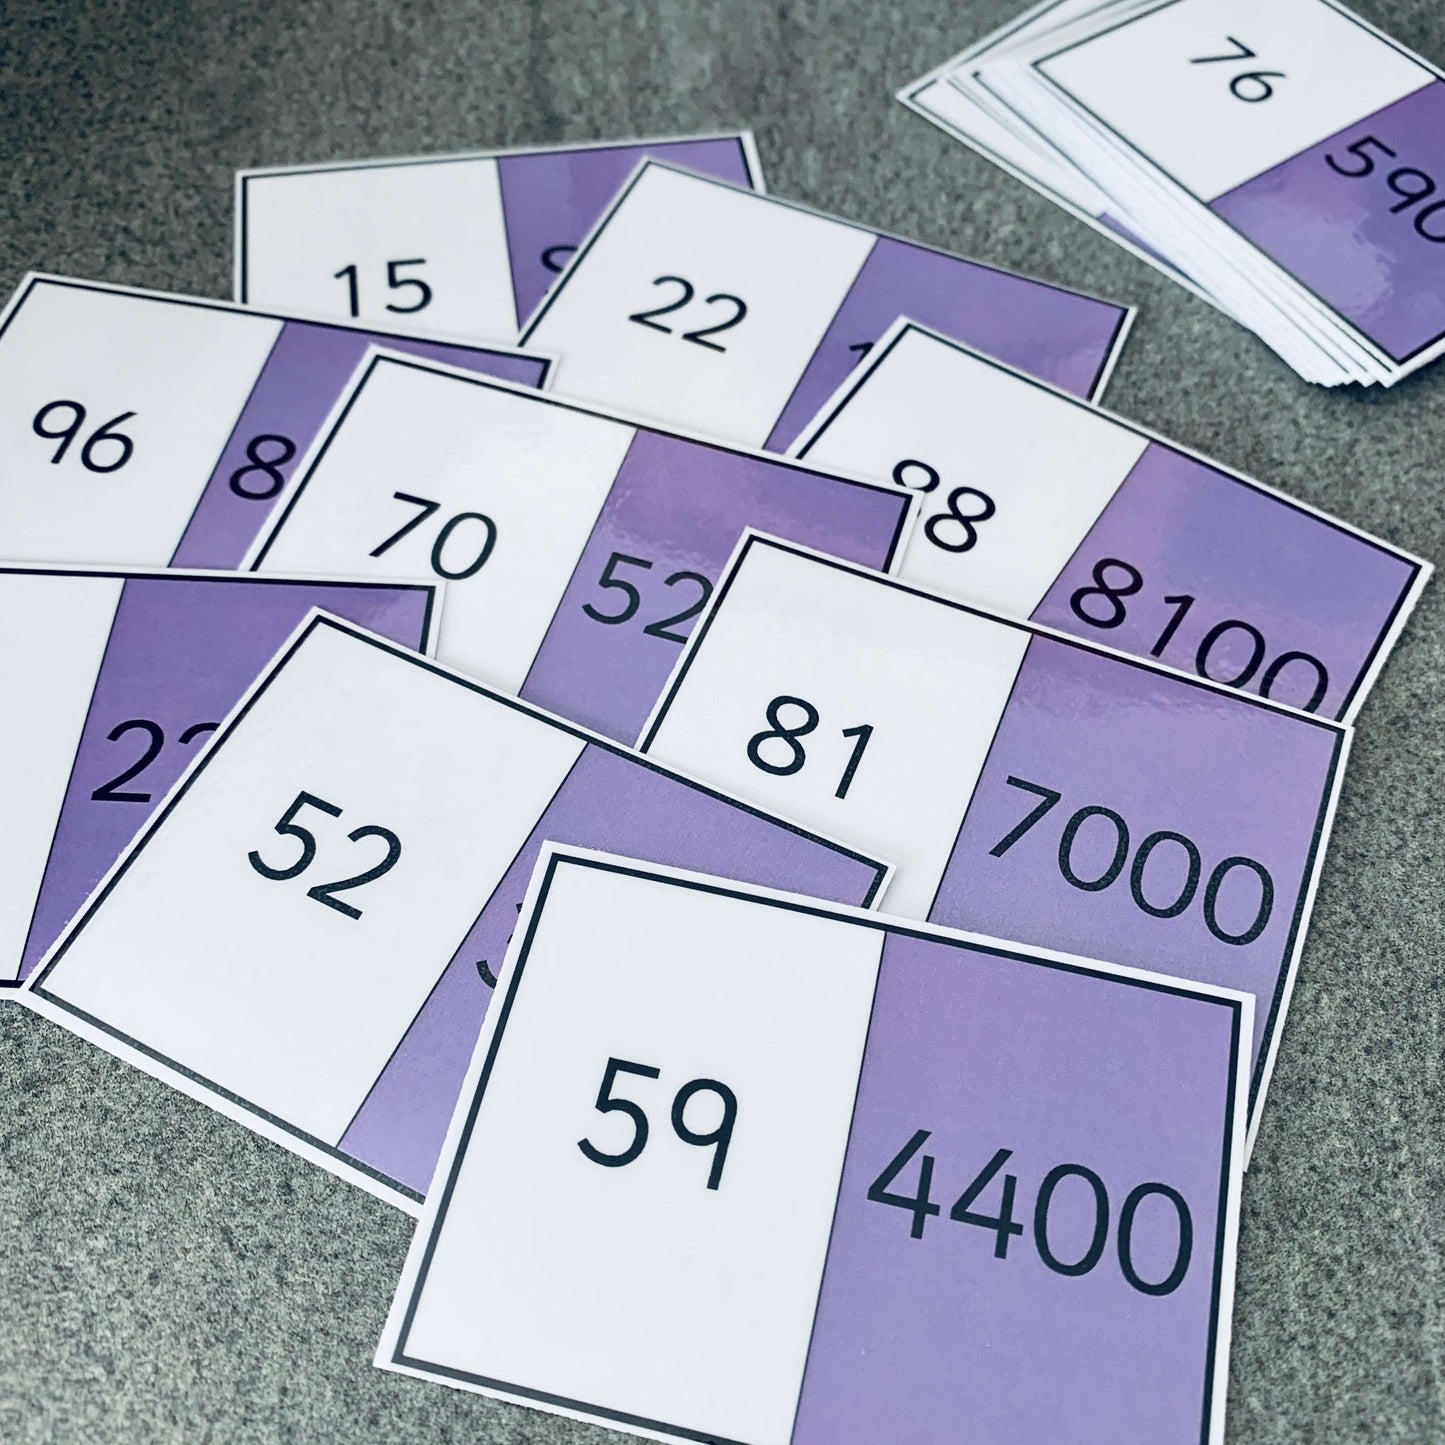 x 100 Loop Cards:Primary Classroom Resources